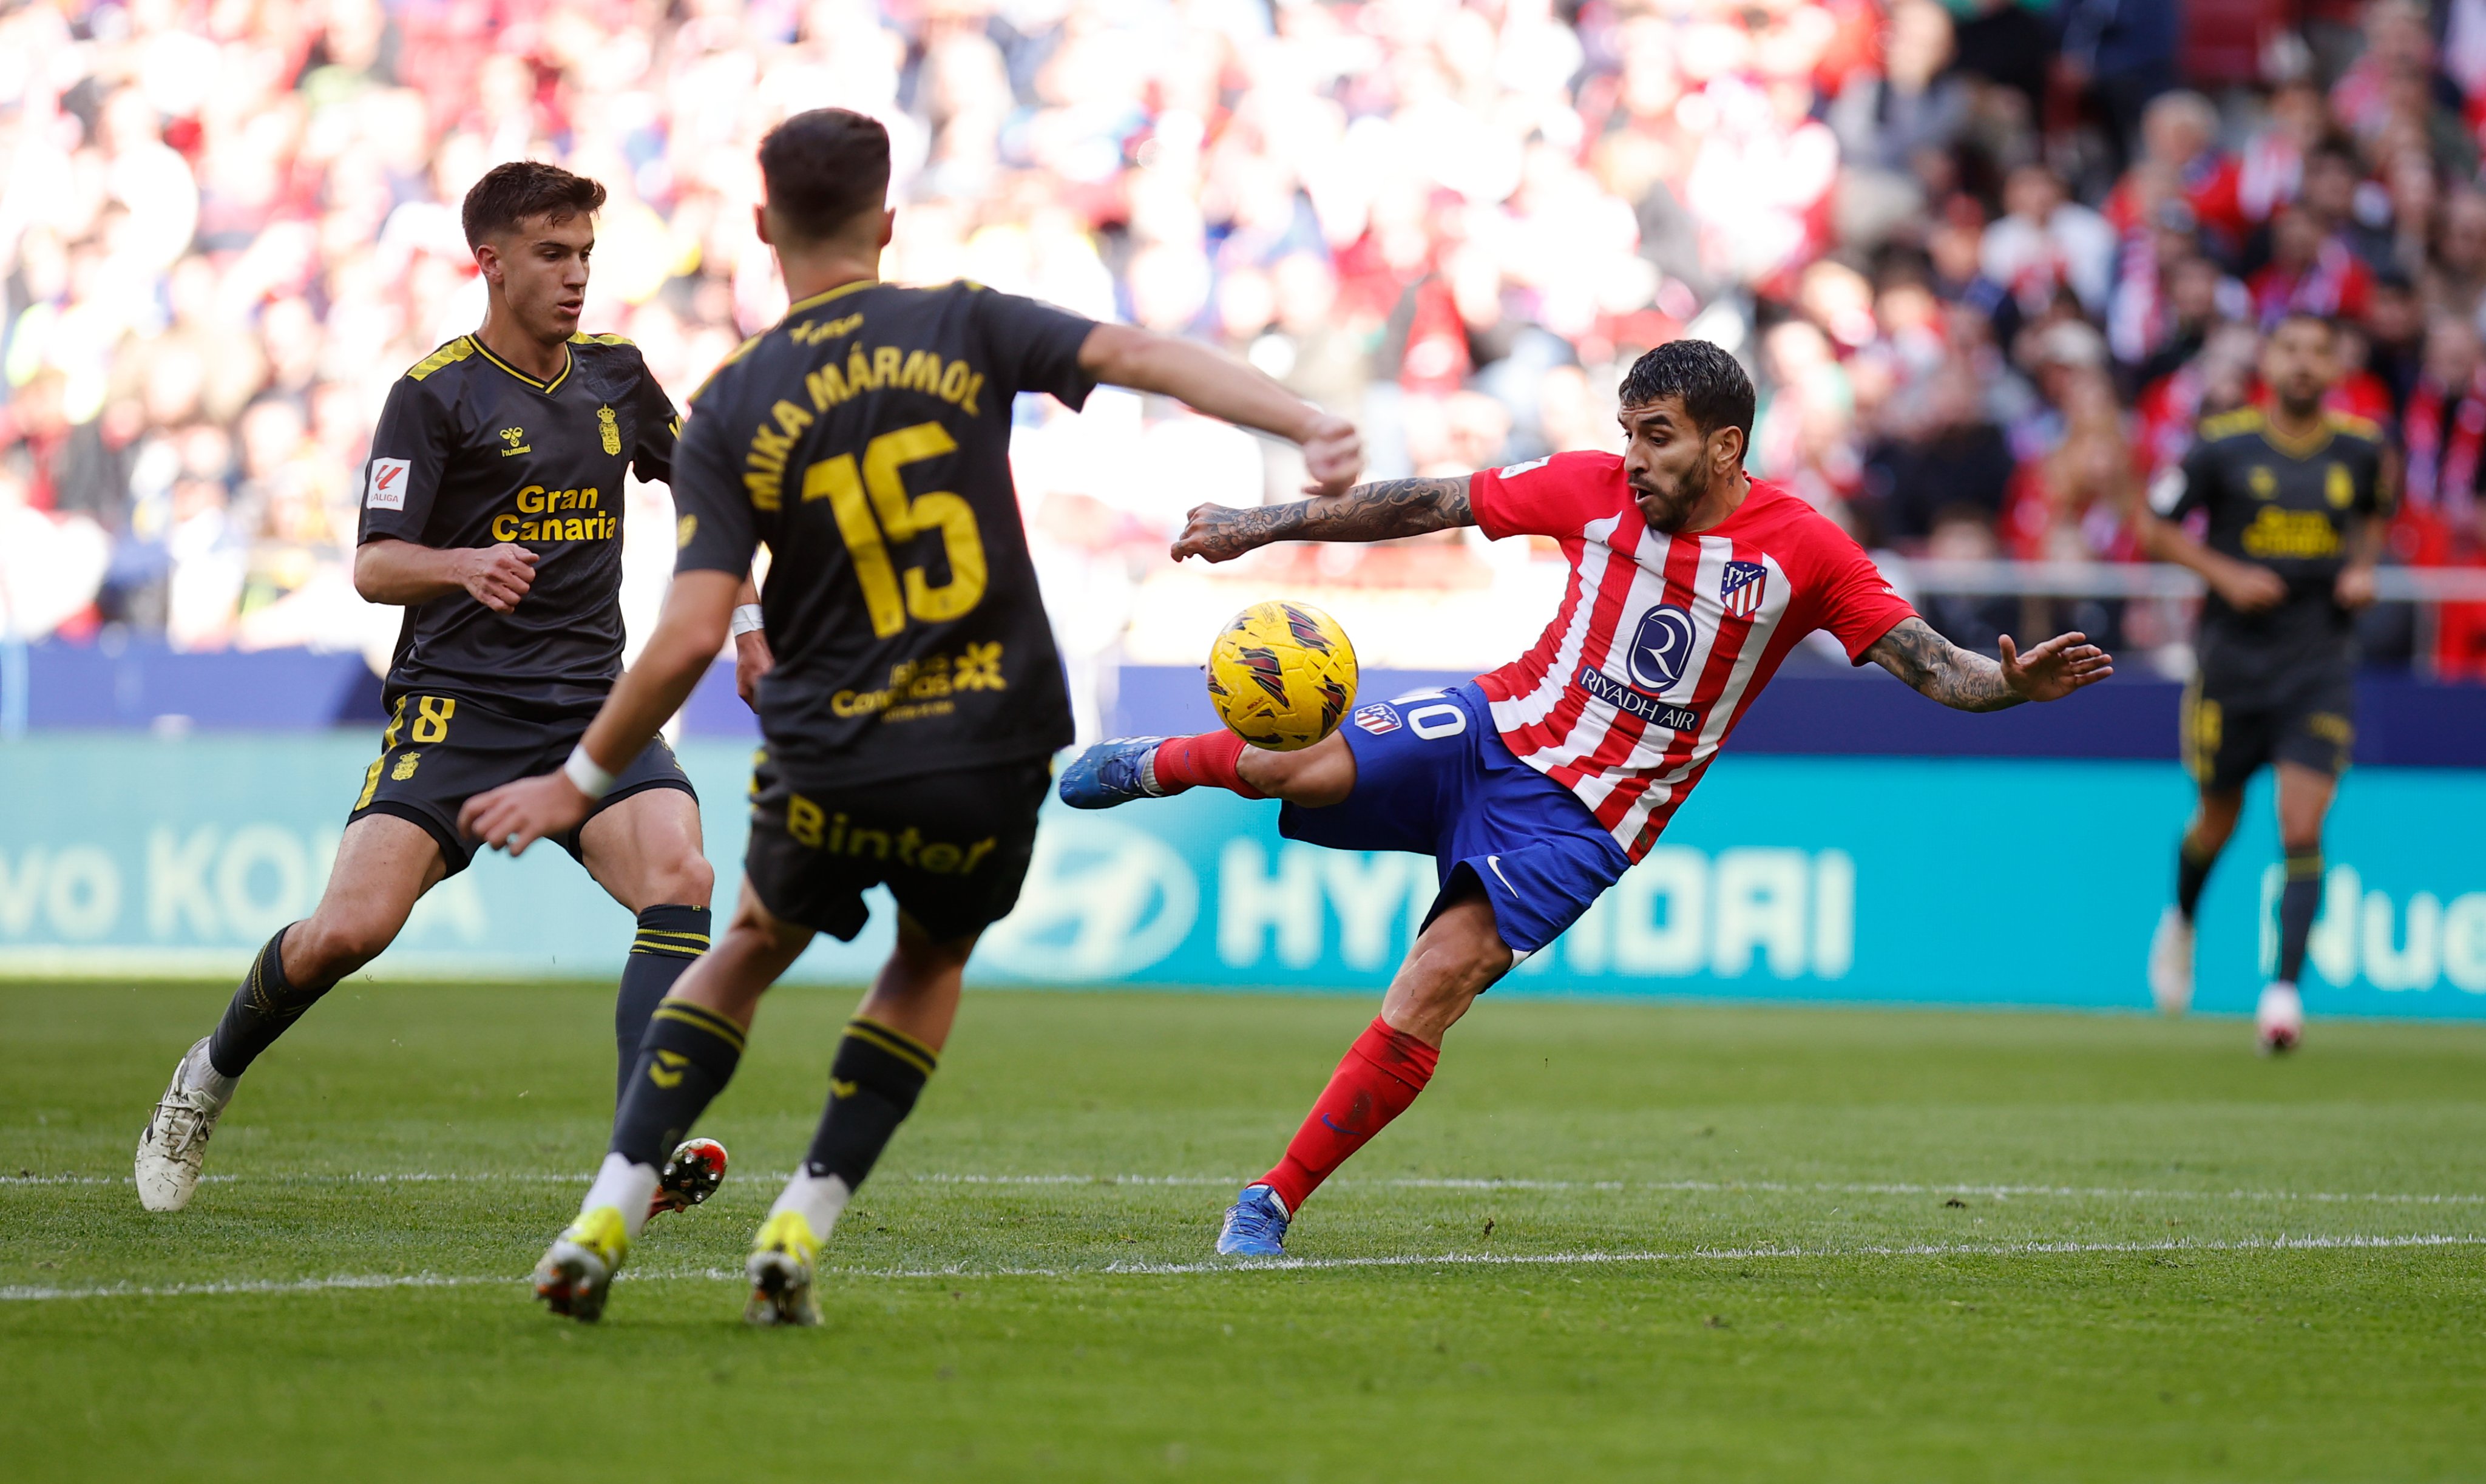 Atletico Madrid manager Diego Simeone keen to retain 29-year-old in spite of club stance